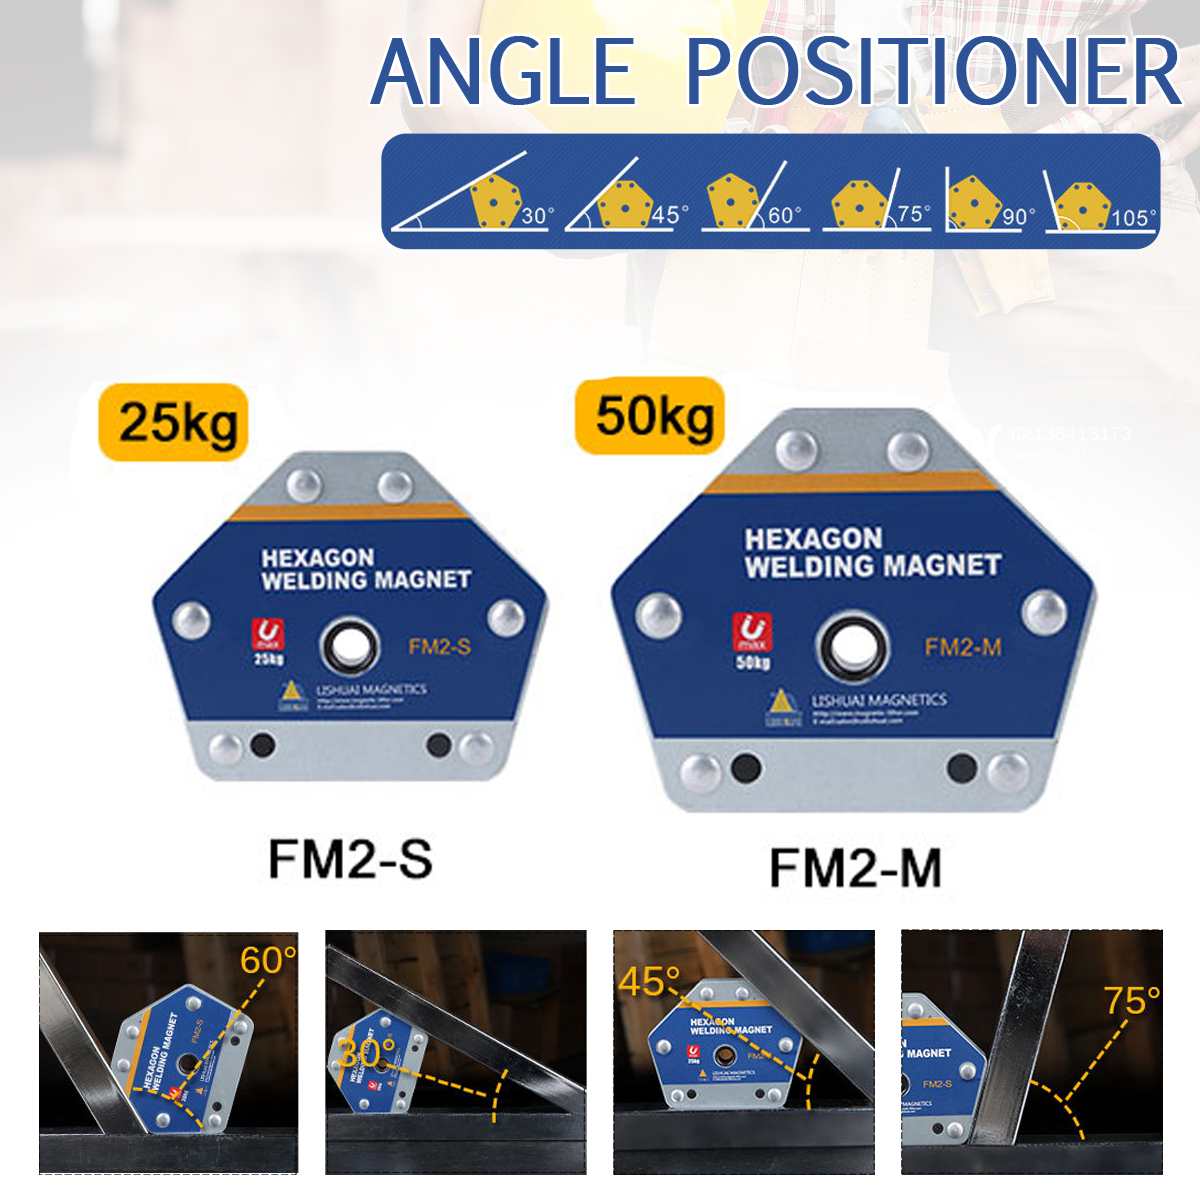 Single Switch Square Magnet On/Off Multi-angle FM2 Welding Magnetic Holder Tool